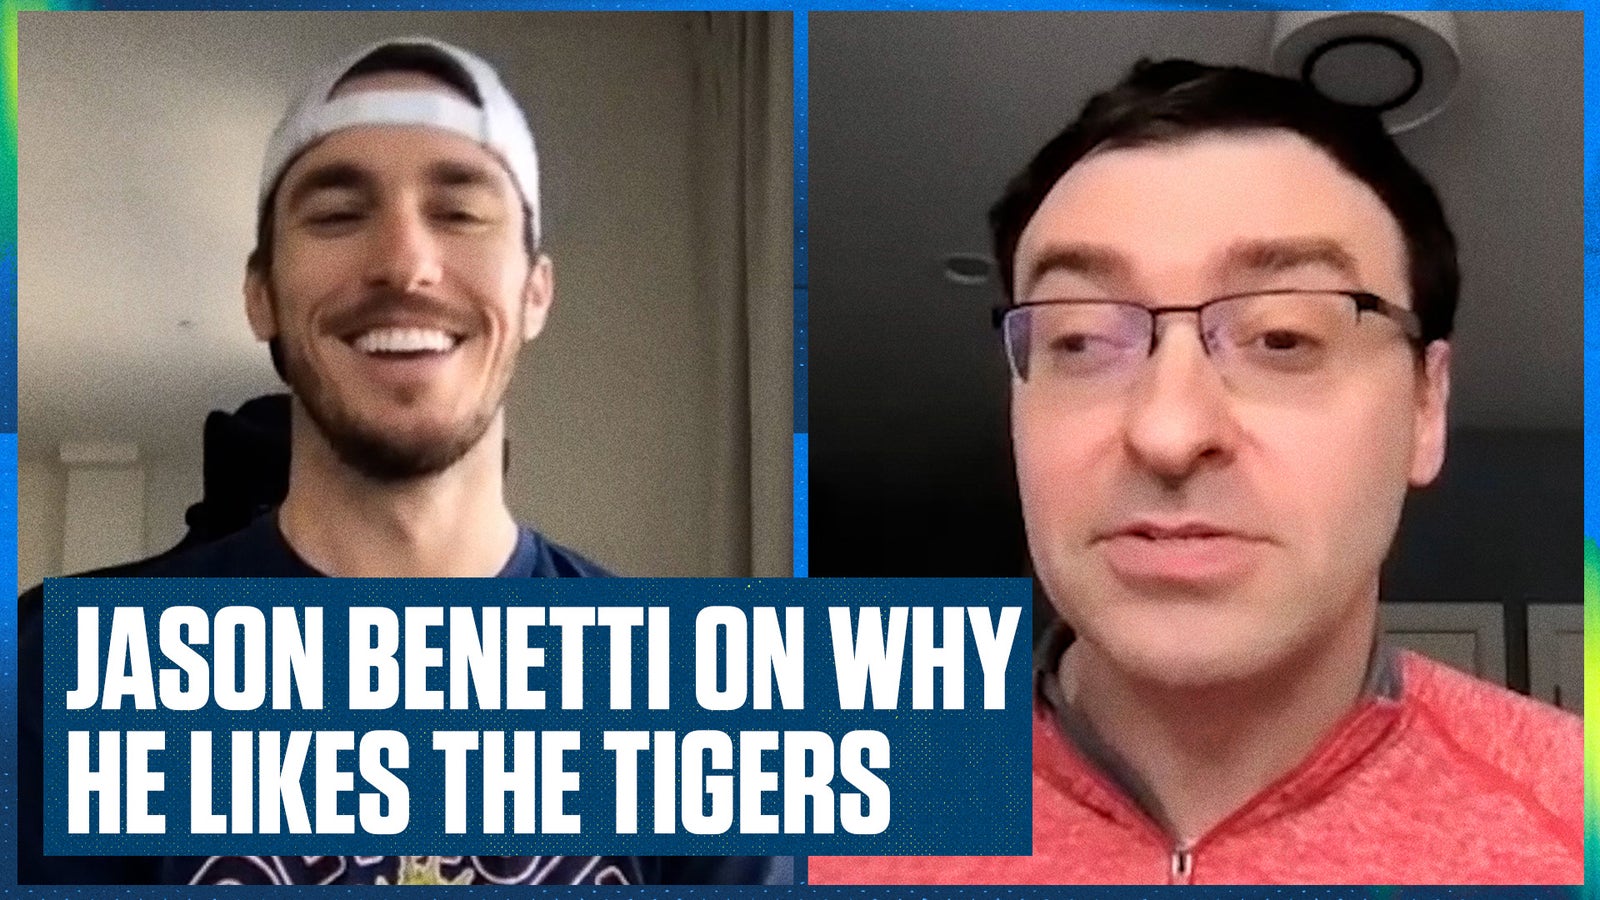 What about the Detroit Tigers excites Jason Benetti the most?